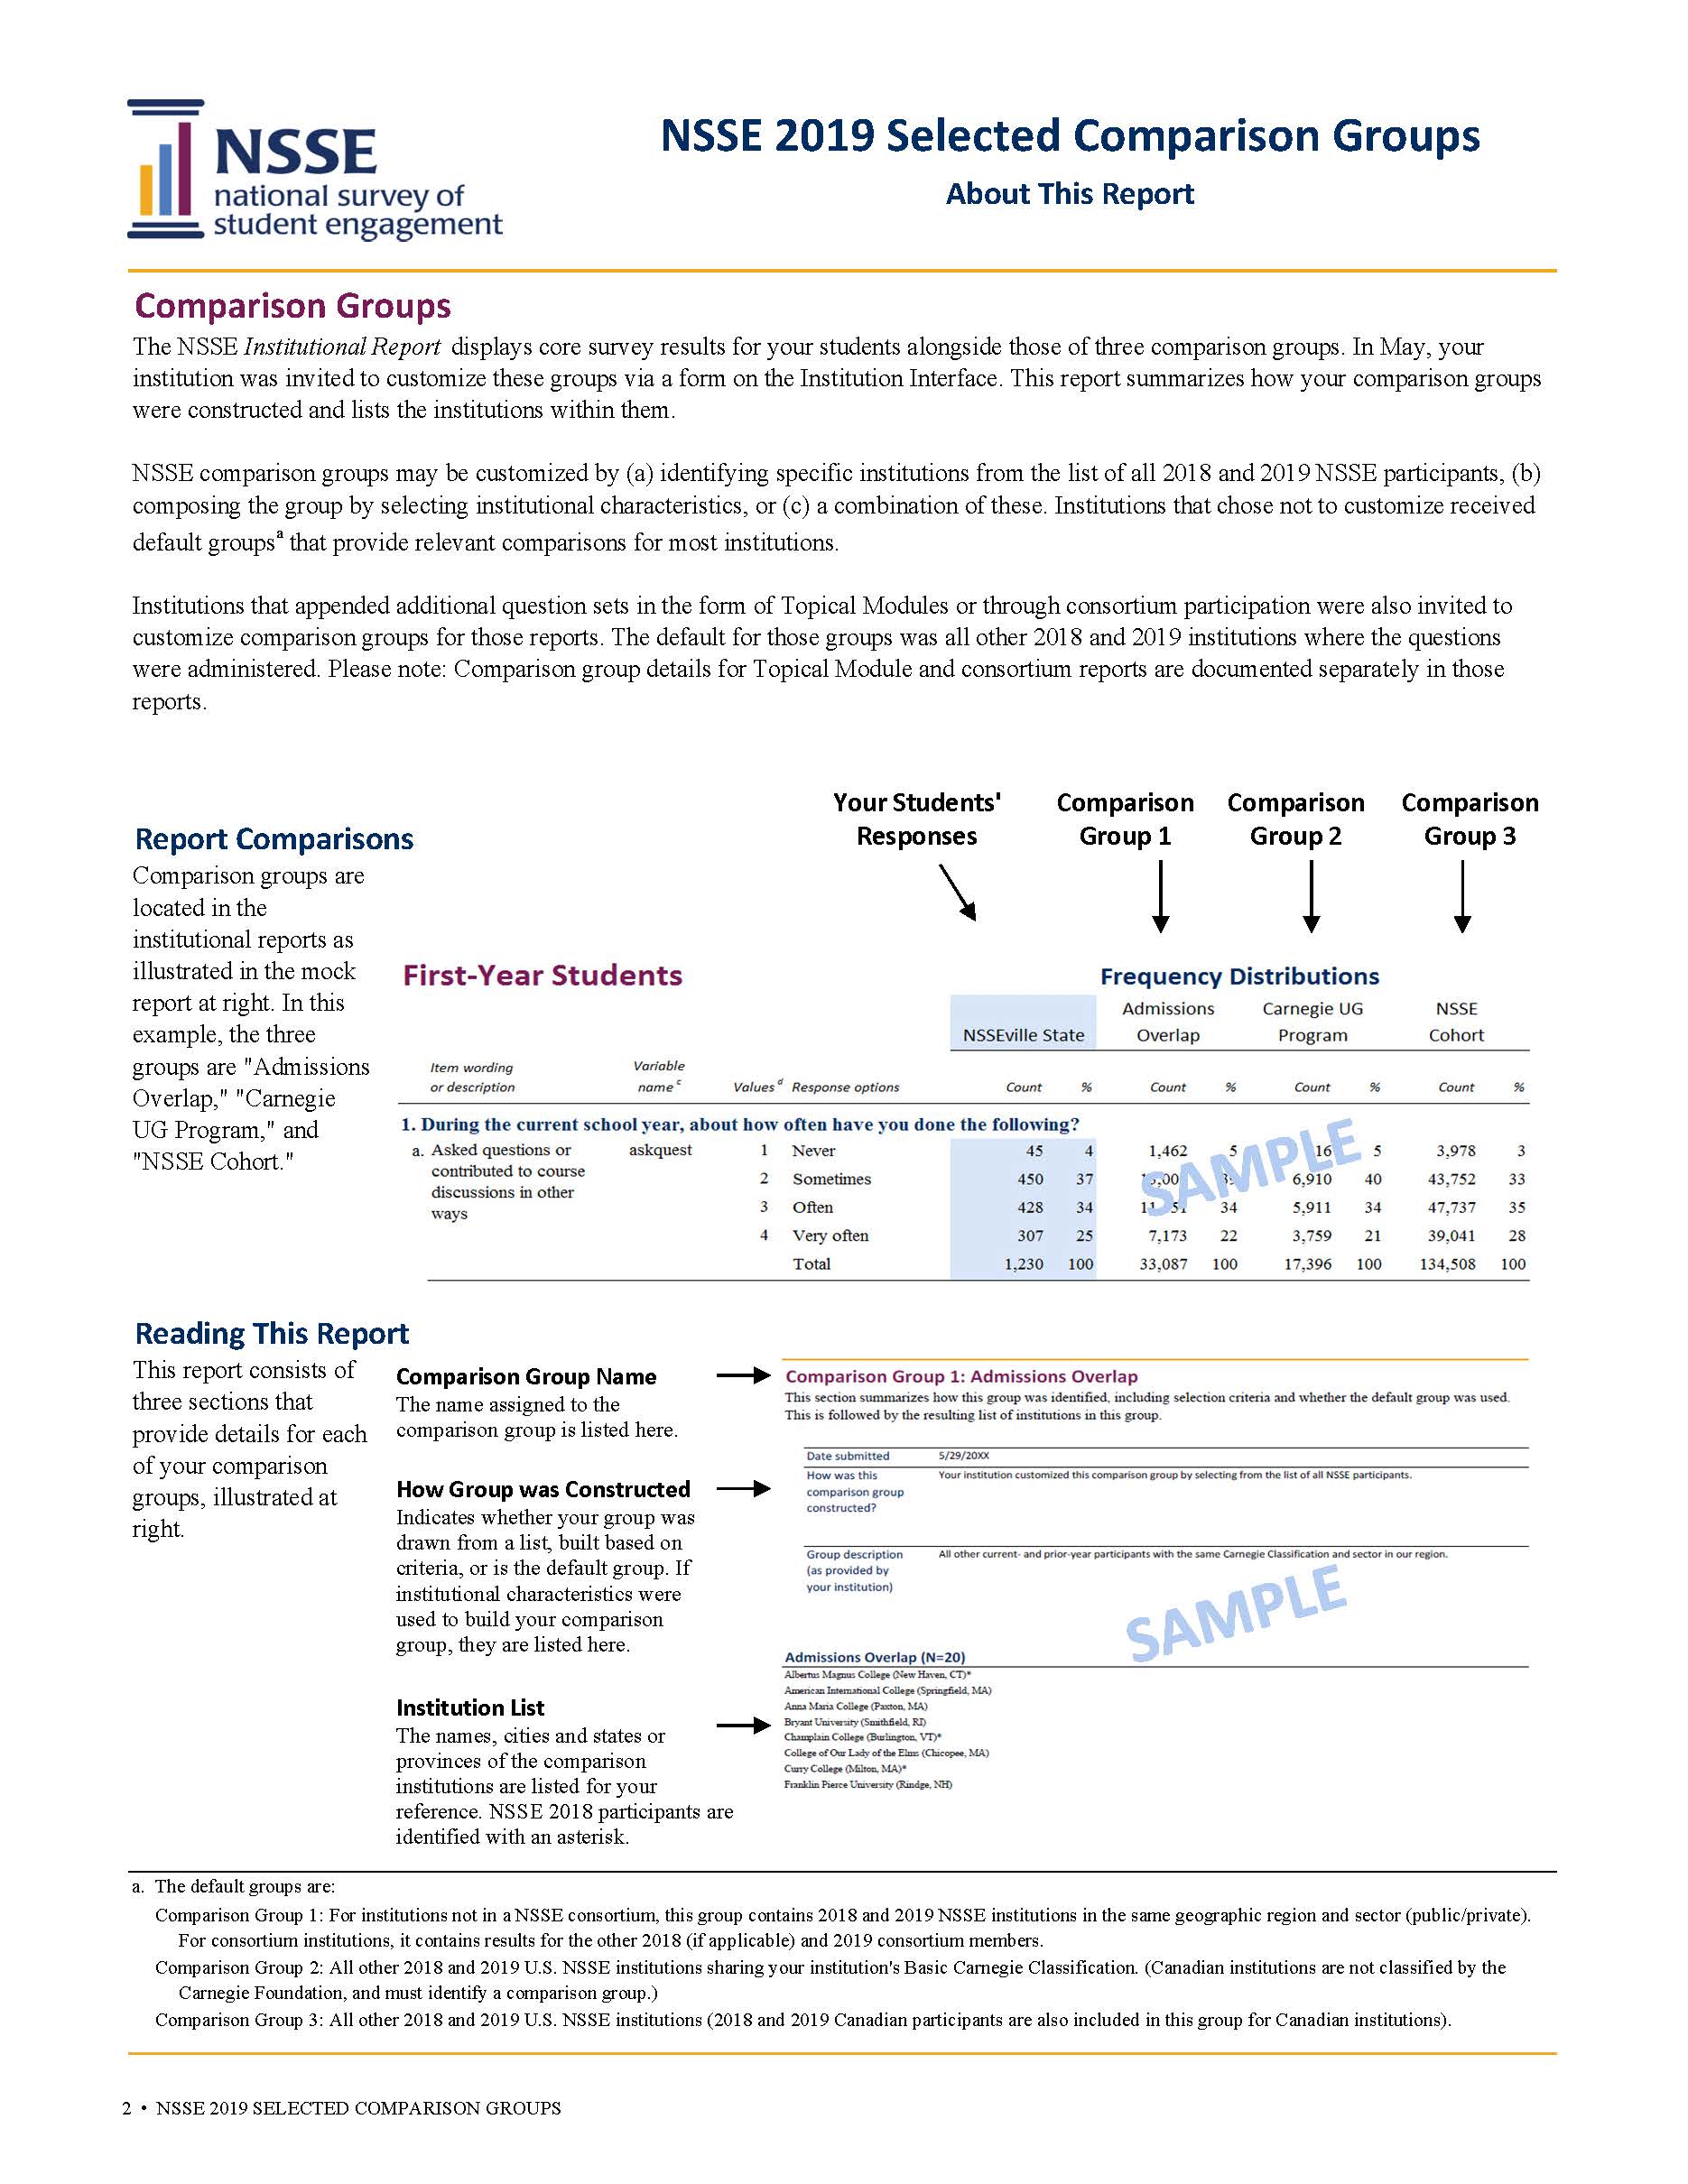 Sample Report: page 2 of NSSE Selected Comparison Groups